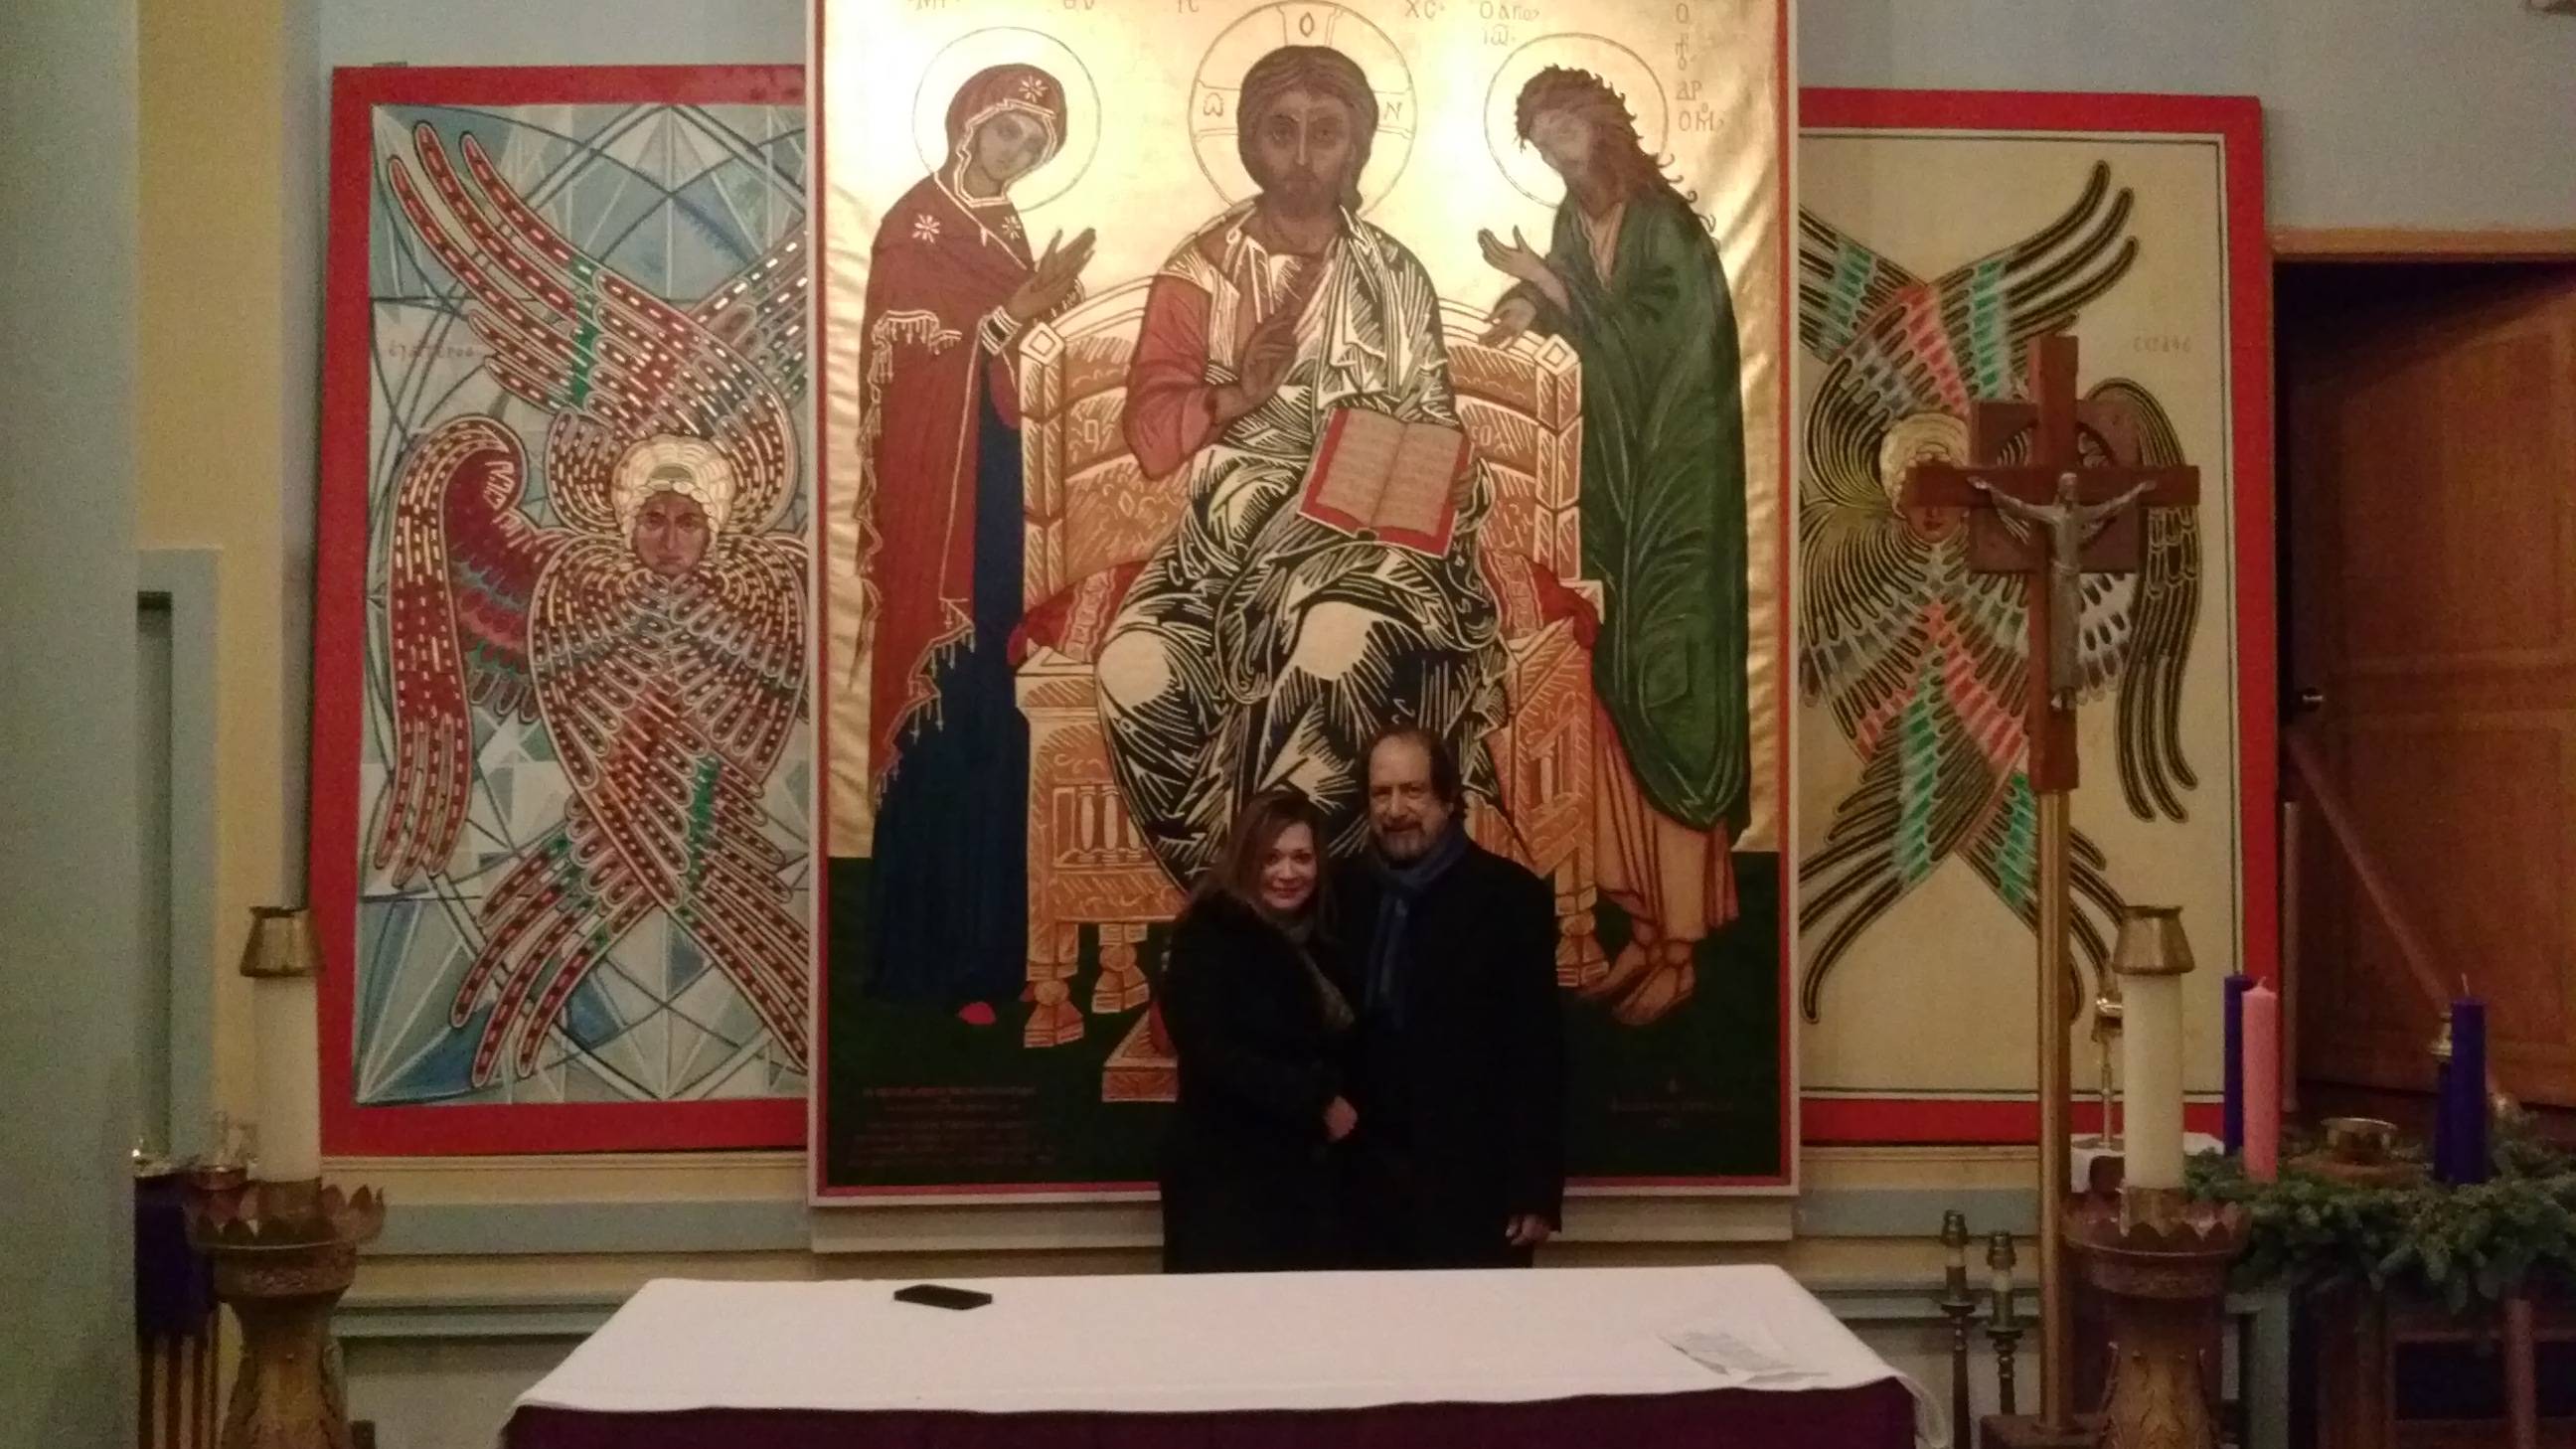 Maria Andriasova Esparza and Guillermo Esparza in front of Guillermo Esparza's Icon Of The Deisis, The Basilica of St. Patrick's Old Cathedral, New York